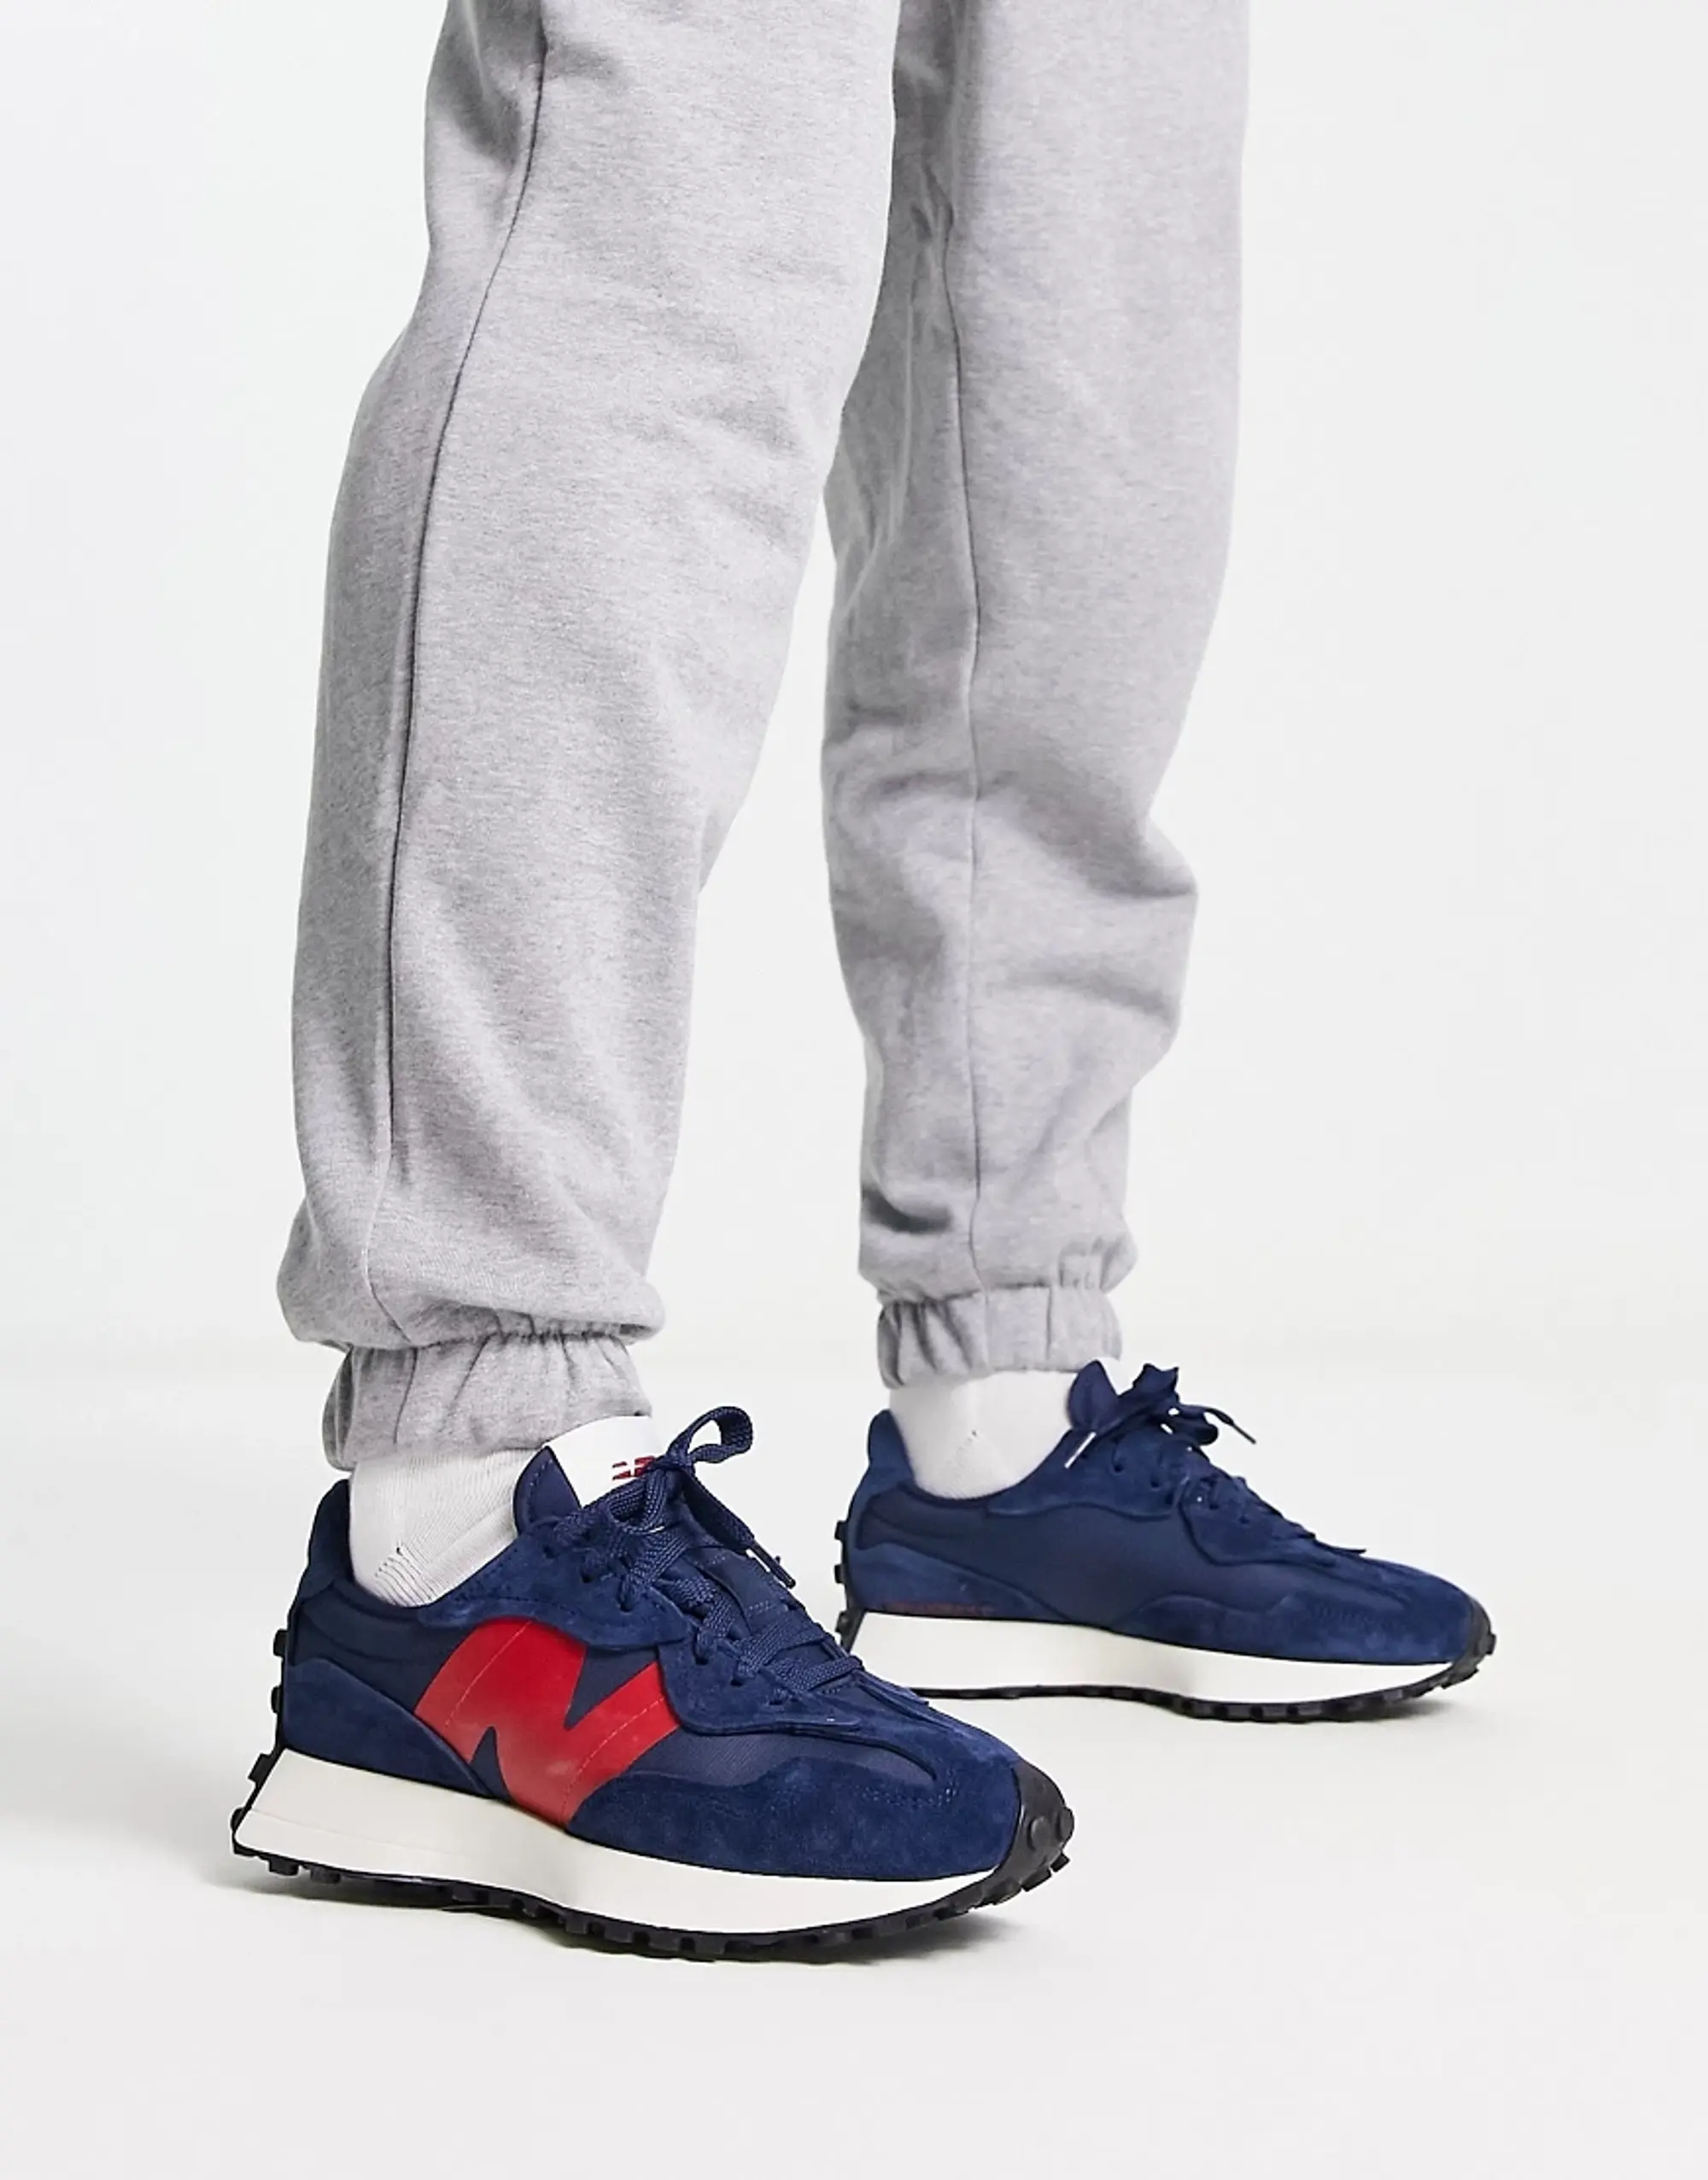 New Balance 327 Trainers In Navy And Red